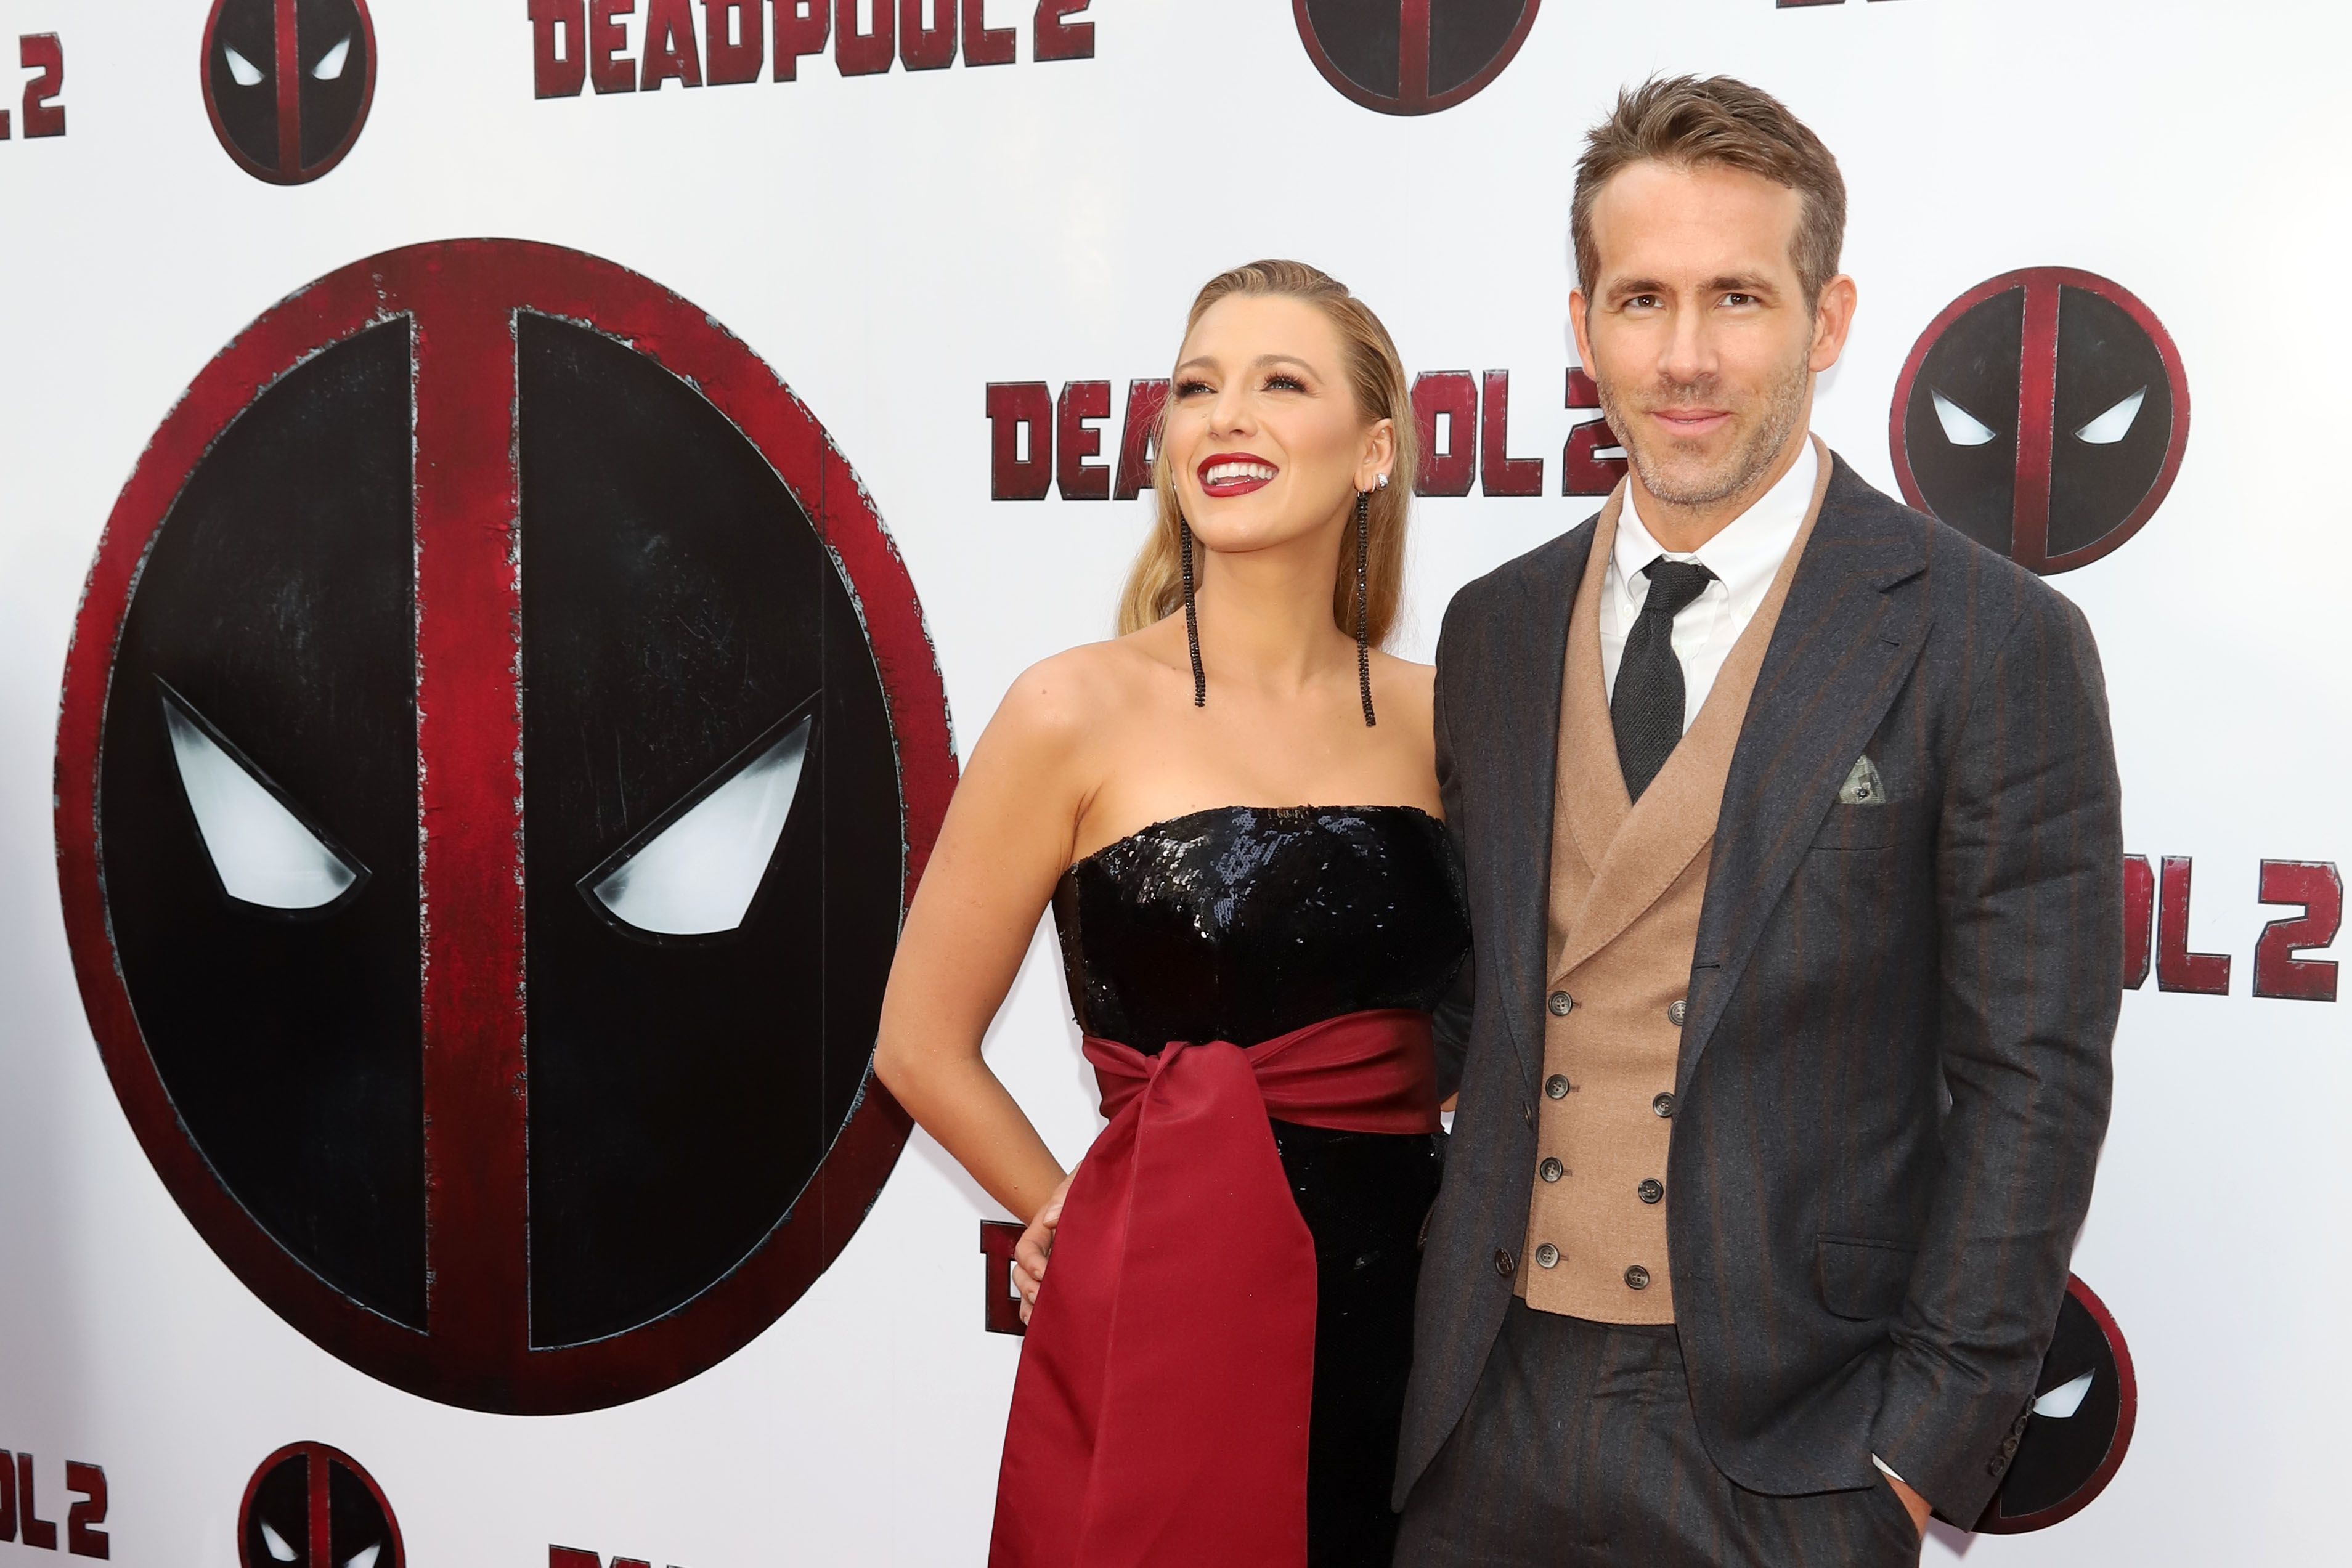 Blake Lively and Ryan Reynolds at the Special Screening of Deadpool 2